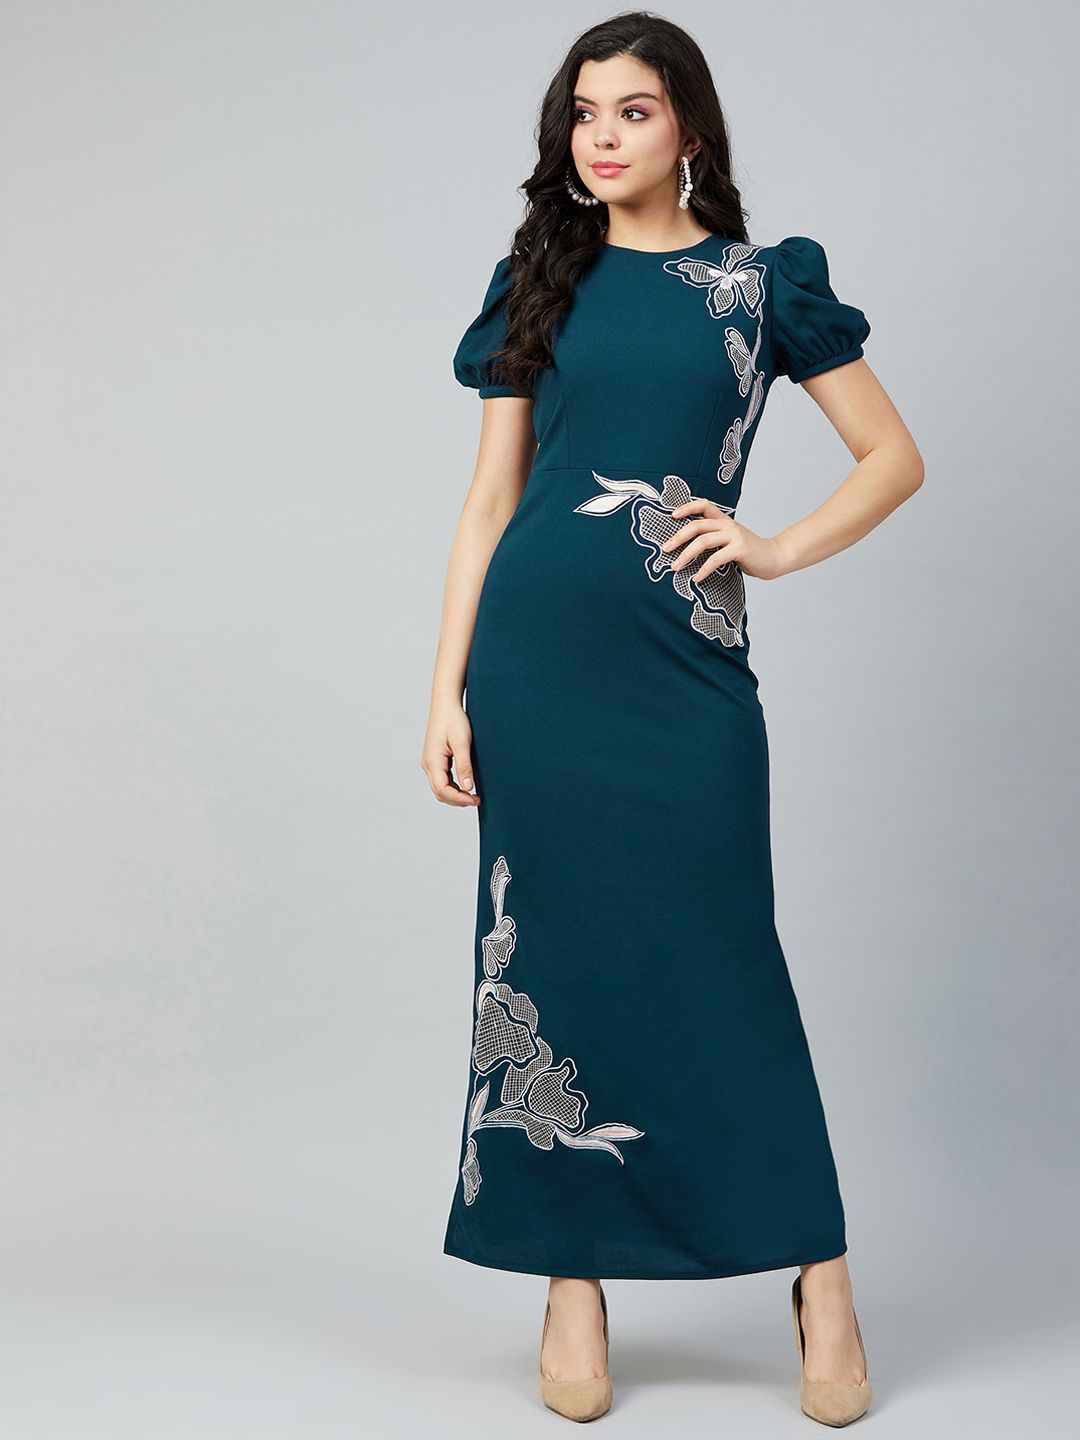 Athena Teal Blue & White Embroidered Maxi Dress Price in India